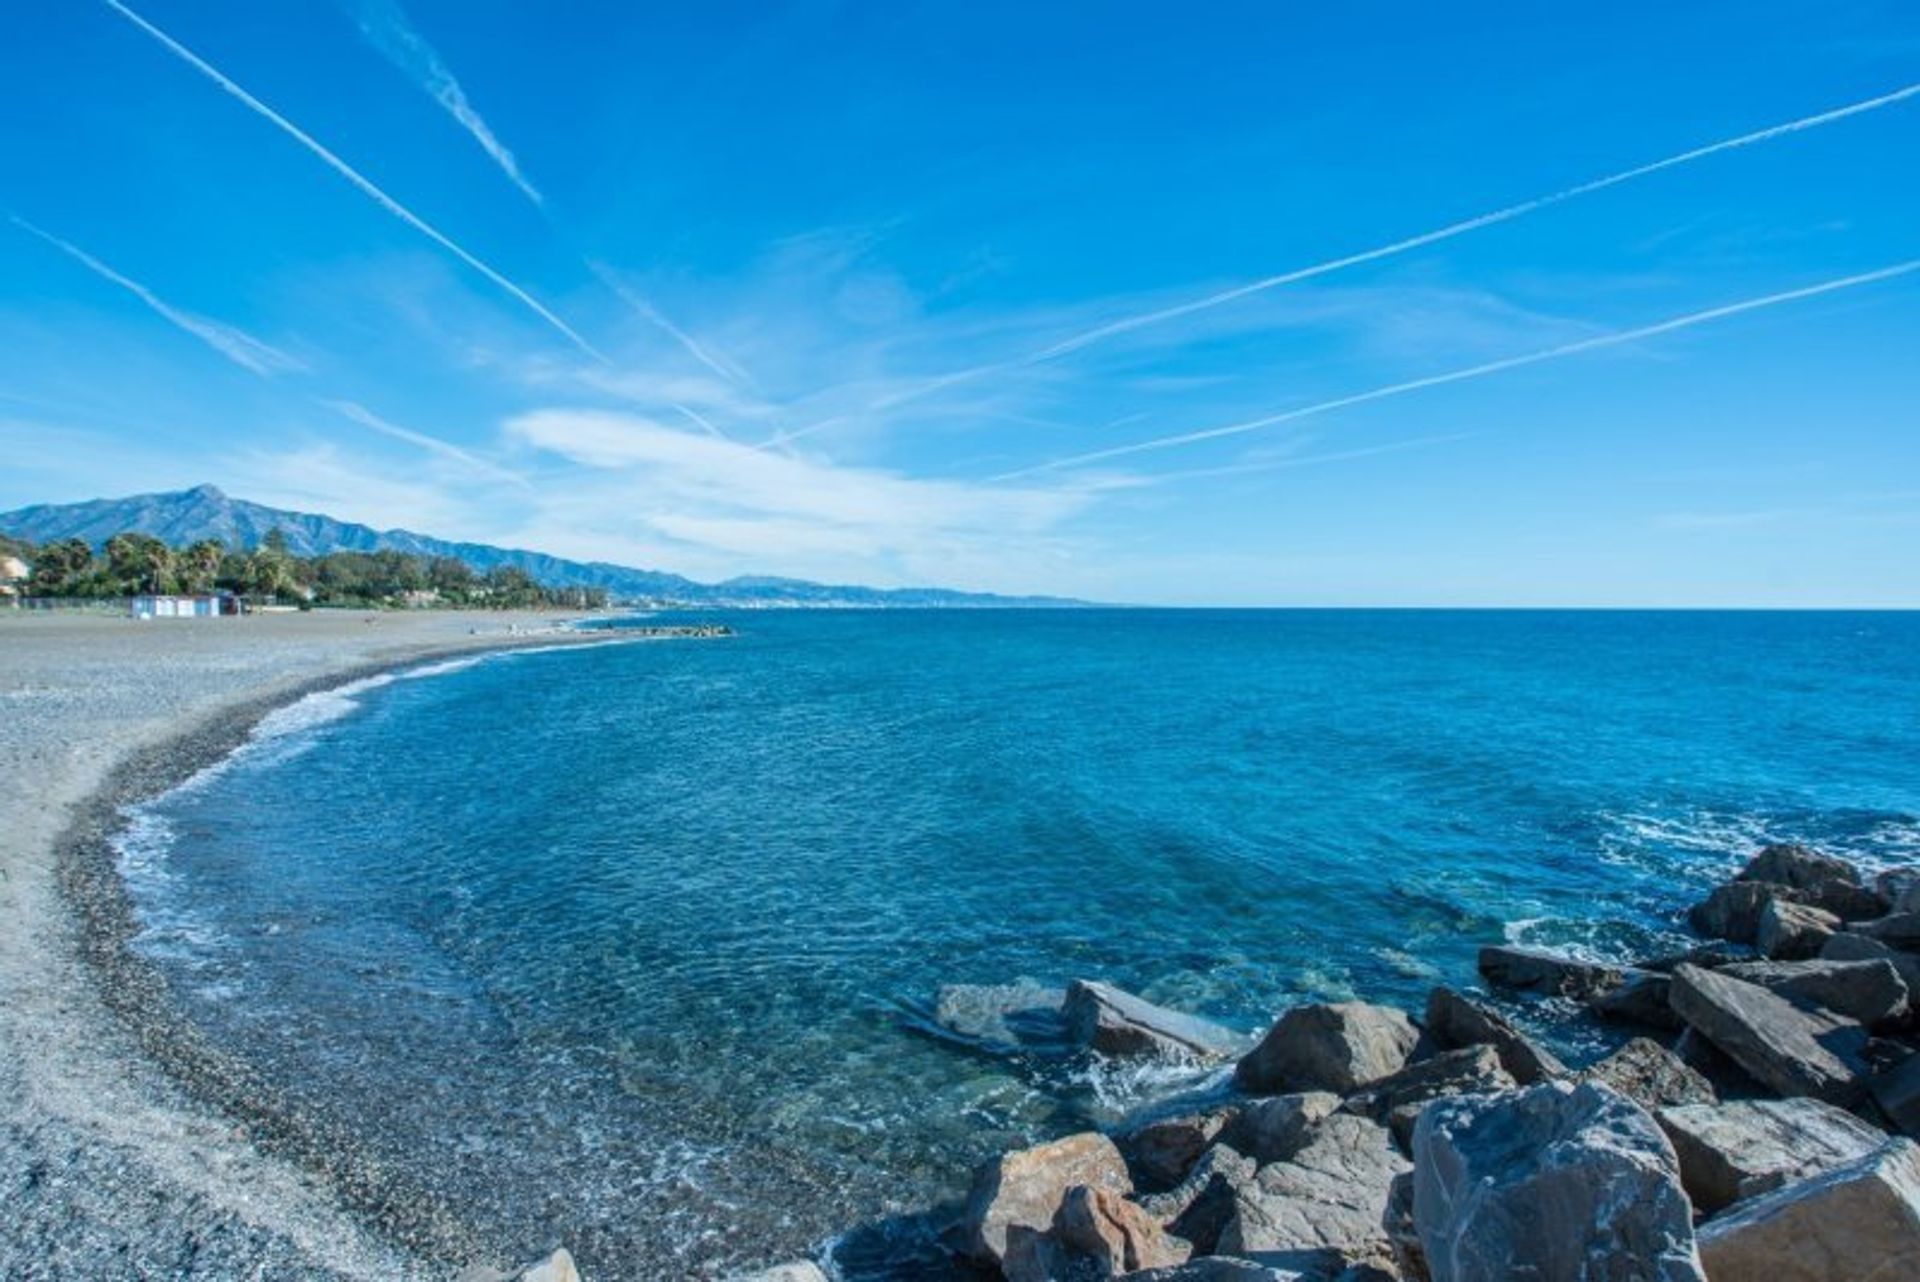 People watch, sunbathe and relax on Marbella's lively beaches, less than half an hour away